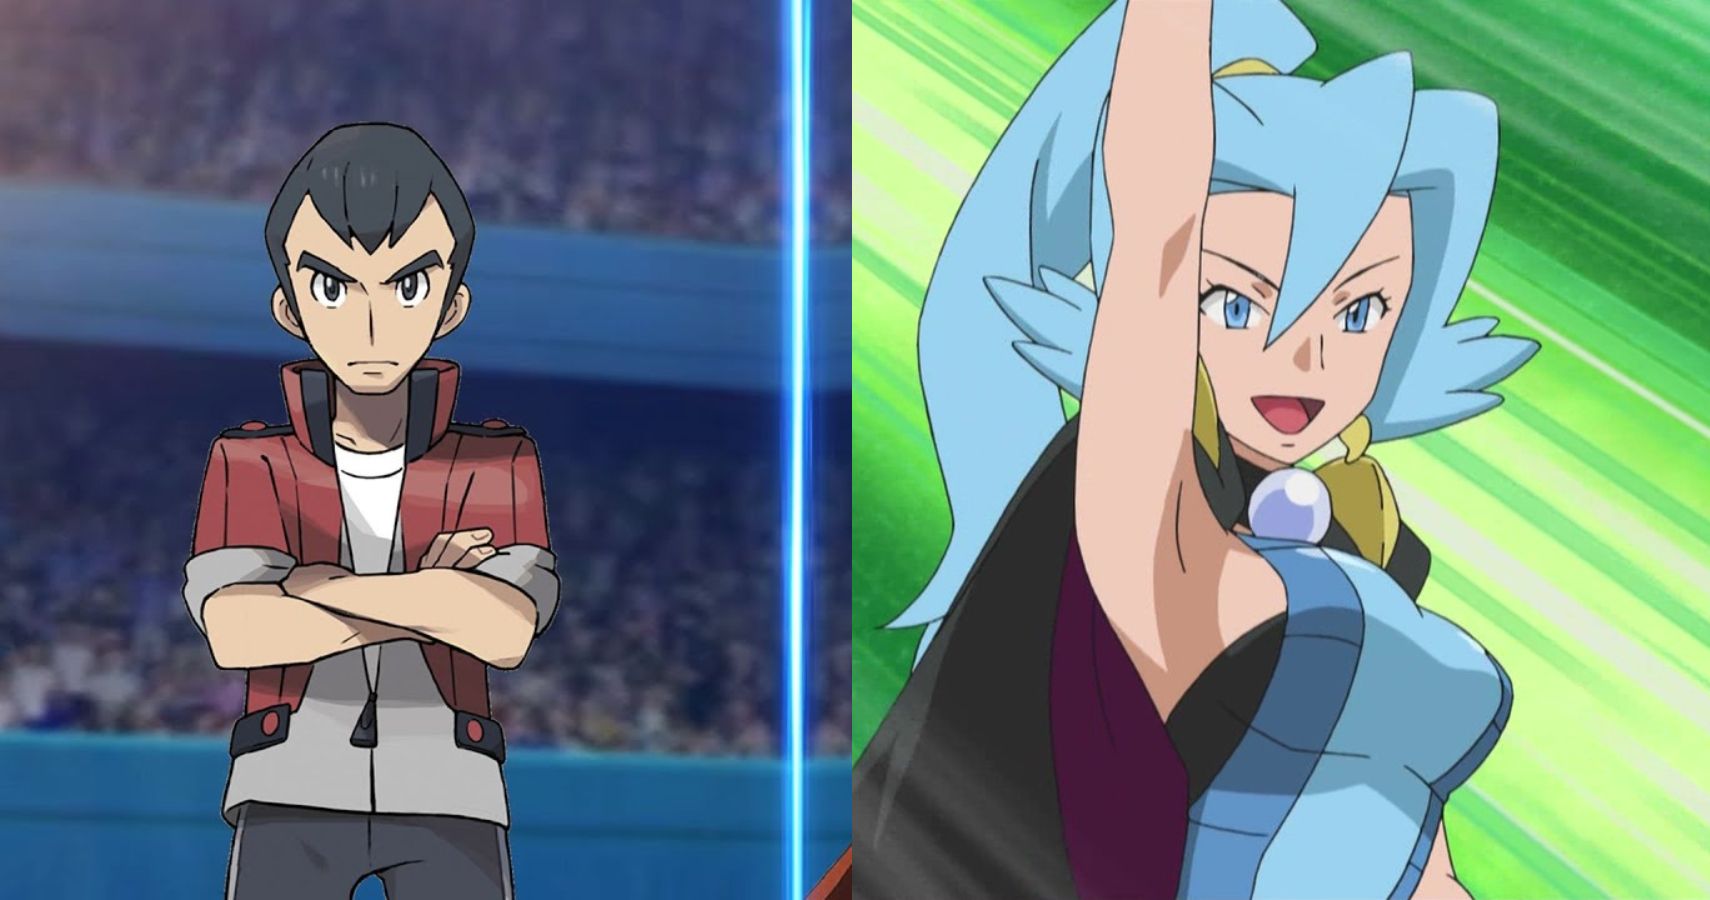 Pokémon The 10 Most Powerful Gym Leaders Ranked. 